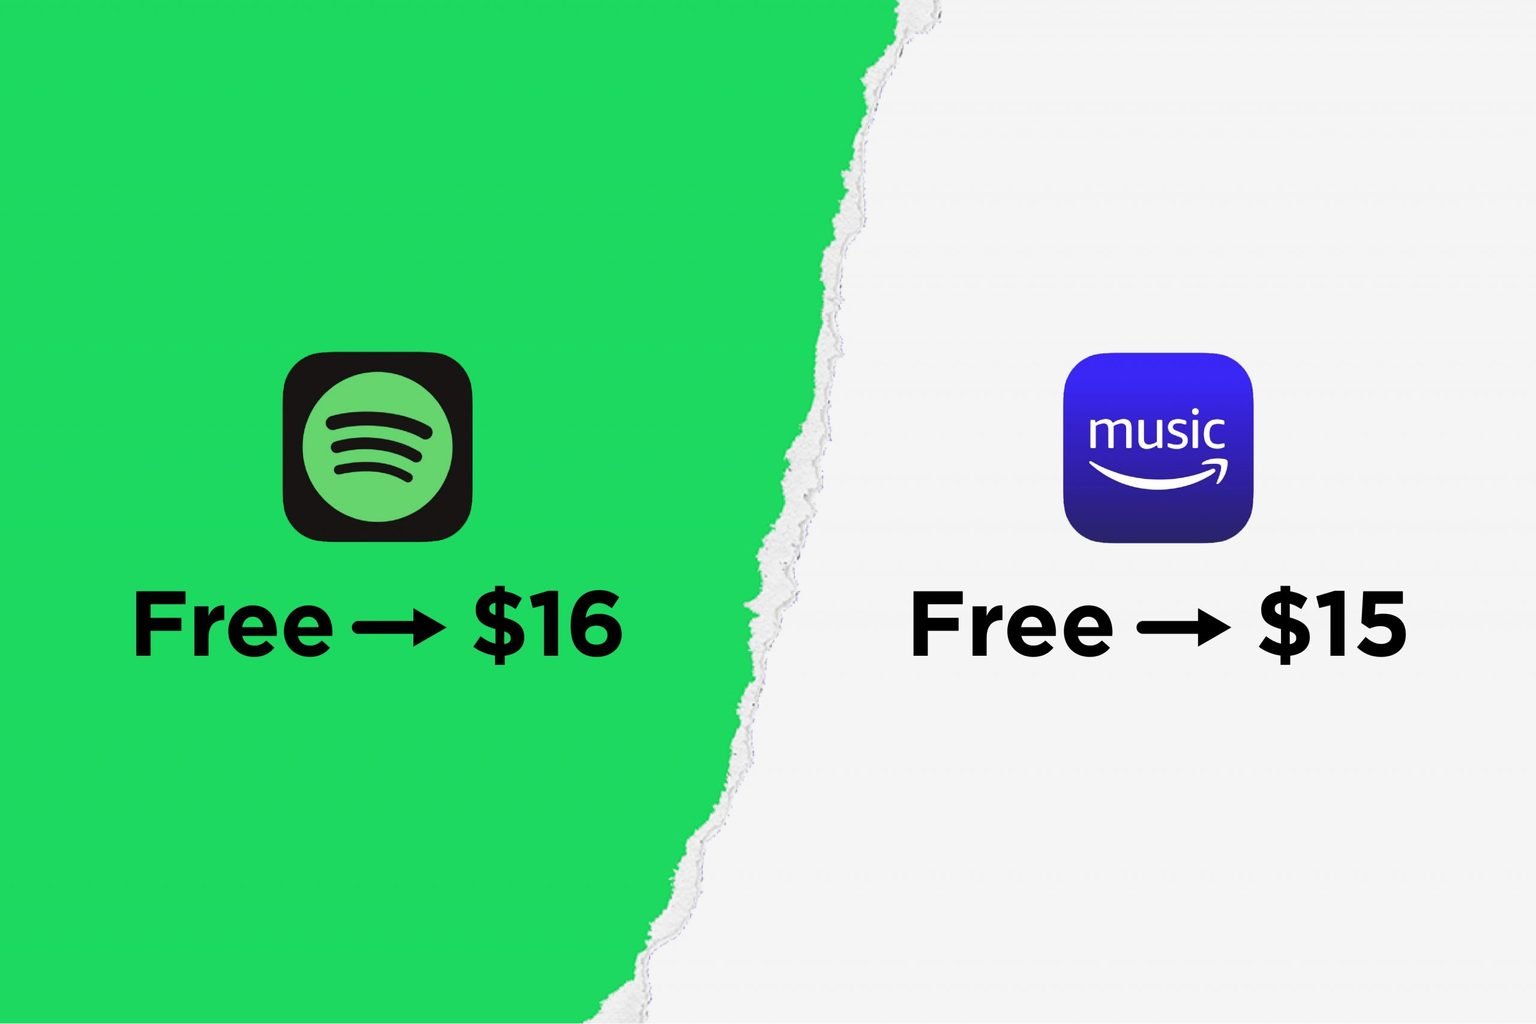 Amazon Music vs Spotify Which Streaming Service Is Better?